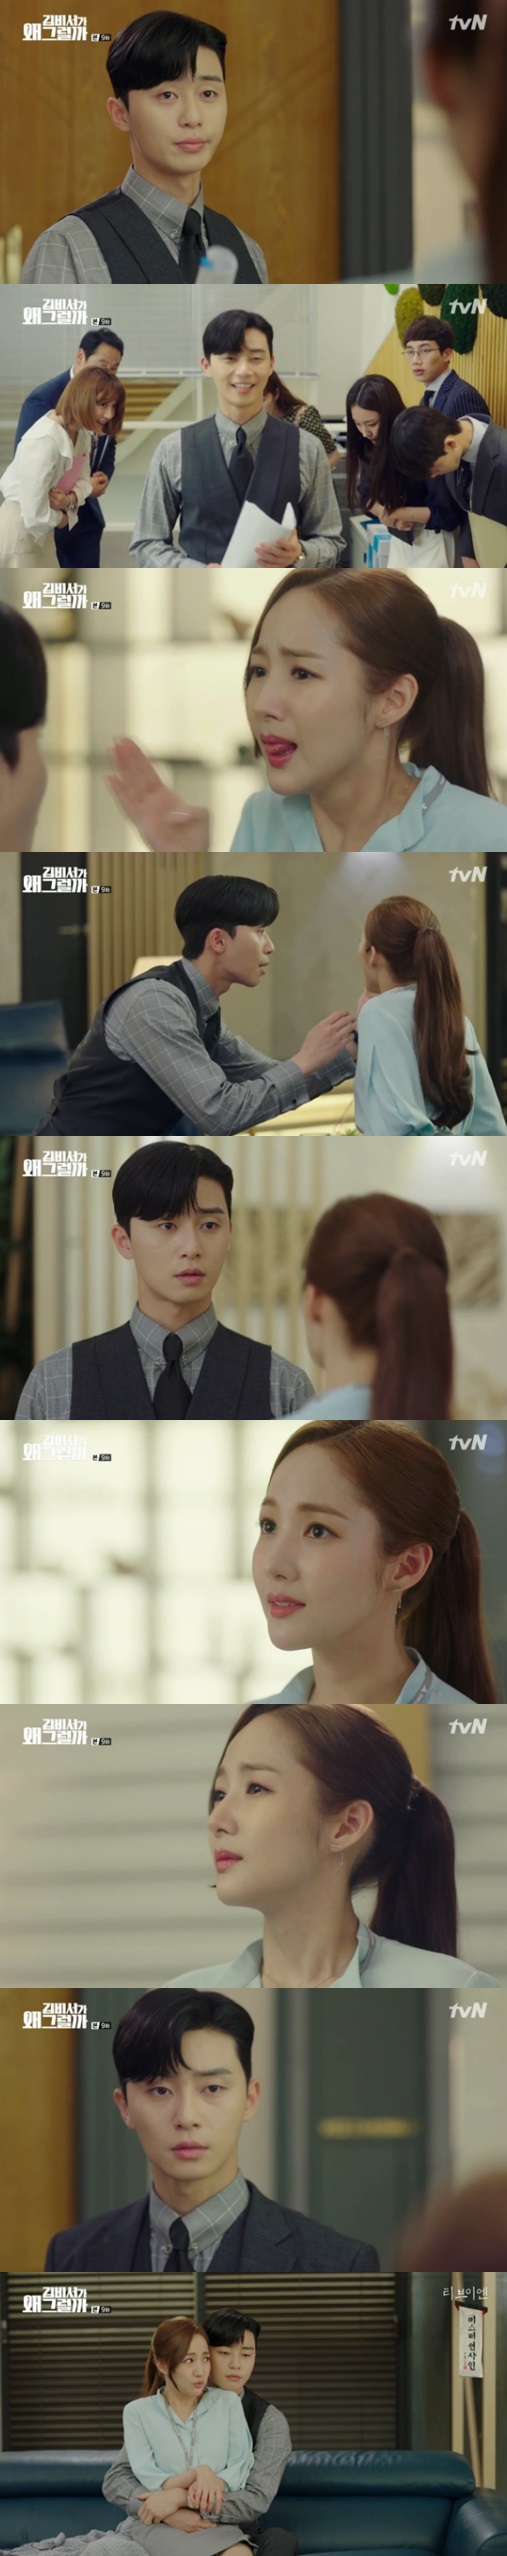 Why is Kim doing it? Actor Park Min-young was convinced that Park Seo-joon was the brother he was looking for as a child.In the 9th episode of the TVN drama Why is Secretary Kim doing that (played by Baek Sun-woo directed by Park Joon-hwa) broadcasted on the afternoon of the 28th, Kim Mi-so (Park Min-young), who started dating in earnest after liquidating the Thumb relationship, was portrayed.The two, who shared a hot kiss, formulated a love relationship.Lee Yeongjun, who became Kim Mi-sos boyfriend, continued to express his affection without hesitation, such as My Girl, I am looking, I have money, I have ability, I have to marry quickly and I am honored to be a special person to me.I wanted to take Kim Mi-so and go home and I was looking back.Life patterns have changed, too: Lee Yeongjun, who has never had a capital for a lifetime overslept, has been sleeping and sleeping at his company.Park Yoo-sik (Kang Ki-young), his best friend, wondered about this change.Lee Yeongjun, who woke up, boldly embraced Kim Mi-so from behind, despite being a company, and said, If you wake up your desire to sleep, take this.I will not slow down the speed of running now, so be prepared. At the same time, Kim Mi-so asked, I keep saying that the vice chairman is like his brother, and did not abandon the suspicion that his brother was Lee Yeongjun, and intentionally avoided Lee Sung-yeon (Lee Tae-hwan).But the long-lasting relationship between vice president and Kim was hard to clear; soon Lee Yeongjun said, What is it?Is it a conversation between lovers? Kim Mi-so thought, Its always a thing, but I feel strange. Lee Yeongjun declared, I will take care of personal things other than business, and I can not help being a selfish boss, but I do not want to be a selfish lover.Lee Yeongjun then made employees shivering by copying handwritten documents and taking refreshments on their own.To make matters worse, Lee Yeongjun and Kim Mi-sos affections were revealed, and Lee Yeongjun tried to make it happen, but Kim Mi-so said, It is uncomfortable.I do not think I am privileged as a lover. It is my work for nine years, so please let me do it in the future. However, due to the gap between the secretary and the lover position, the two men were in a fight.Lee Yeongjun went to Park Yoo-sik and said, How is Secretary Kim so rational? How is he so thorough. So Walkerholic.Kim said, I do not know the mans mind too much. Park Yoo-sik seriously advised his farewell experience.Kim Mi-so was also desperate for reconciliation, but the two men left without being able to speak in their hearts.Lee Yeongjun first bought a pig shell from Kim Mi-sos regular house and went to Kim Mi-sos house.Kim Mi-so laughed, imagining Lee Yeongjun, who even baked it himself.Lee Yeongjun, who laughed at Kim Mi-sos words, I wanted to see and laughed, said, I will call you smile, so call me brother.At this time, the sisters who listened to Lee Yeongjuns back story came to the house every time from Kim Mi-so, and Lee Yeongjun hid in the closet.Lee Yeongjun was told all of his insults and was greatly sprained.However, he said, I have made up my mind, but what if I fight? He said, I am so beautiful that I can not get angry anymore.Lee Sung-yeon continued to contact Kim Mi-so, and Kim Mi-so frankly confided in Lee Yeongjun and said, I will tell my heart and organize it.Lee Sung-yeon met Kim Mi-so and talked about Lee Yeongjun, and Lee Yeongjun appeared and took Kim Mi-so out saying, When will you do that? The two enjoyed a river date.Kim Mi-so, who listened to Lee Yeongjun, confirmed that his younger brother was Lee Yeongjun.